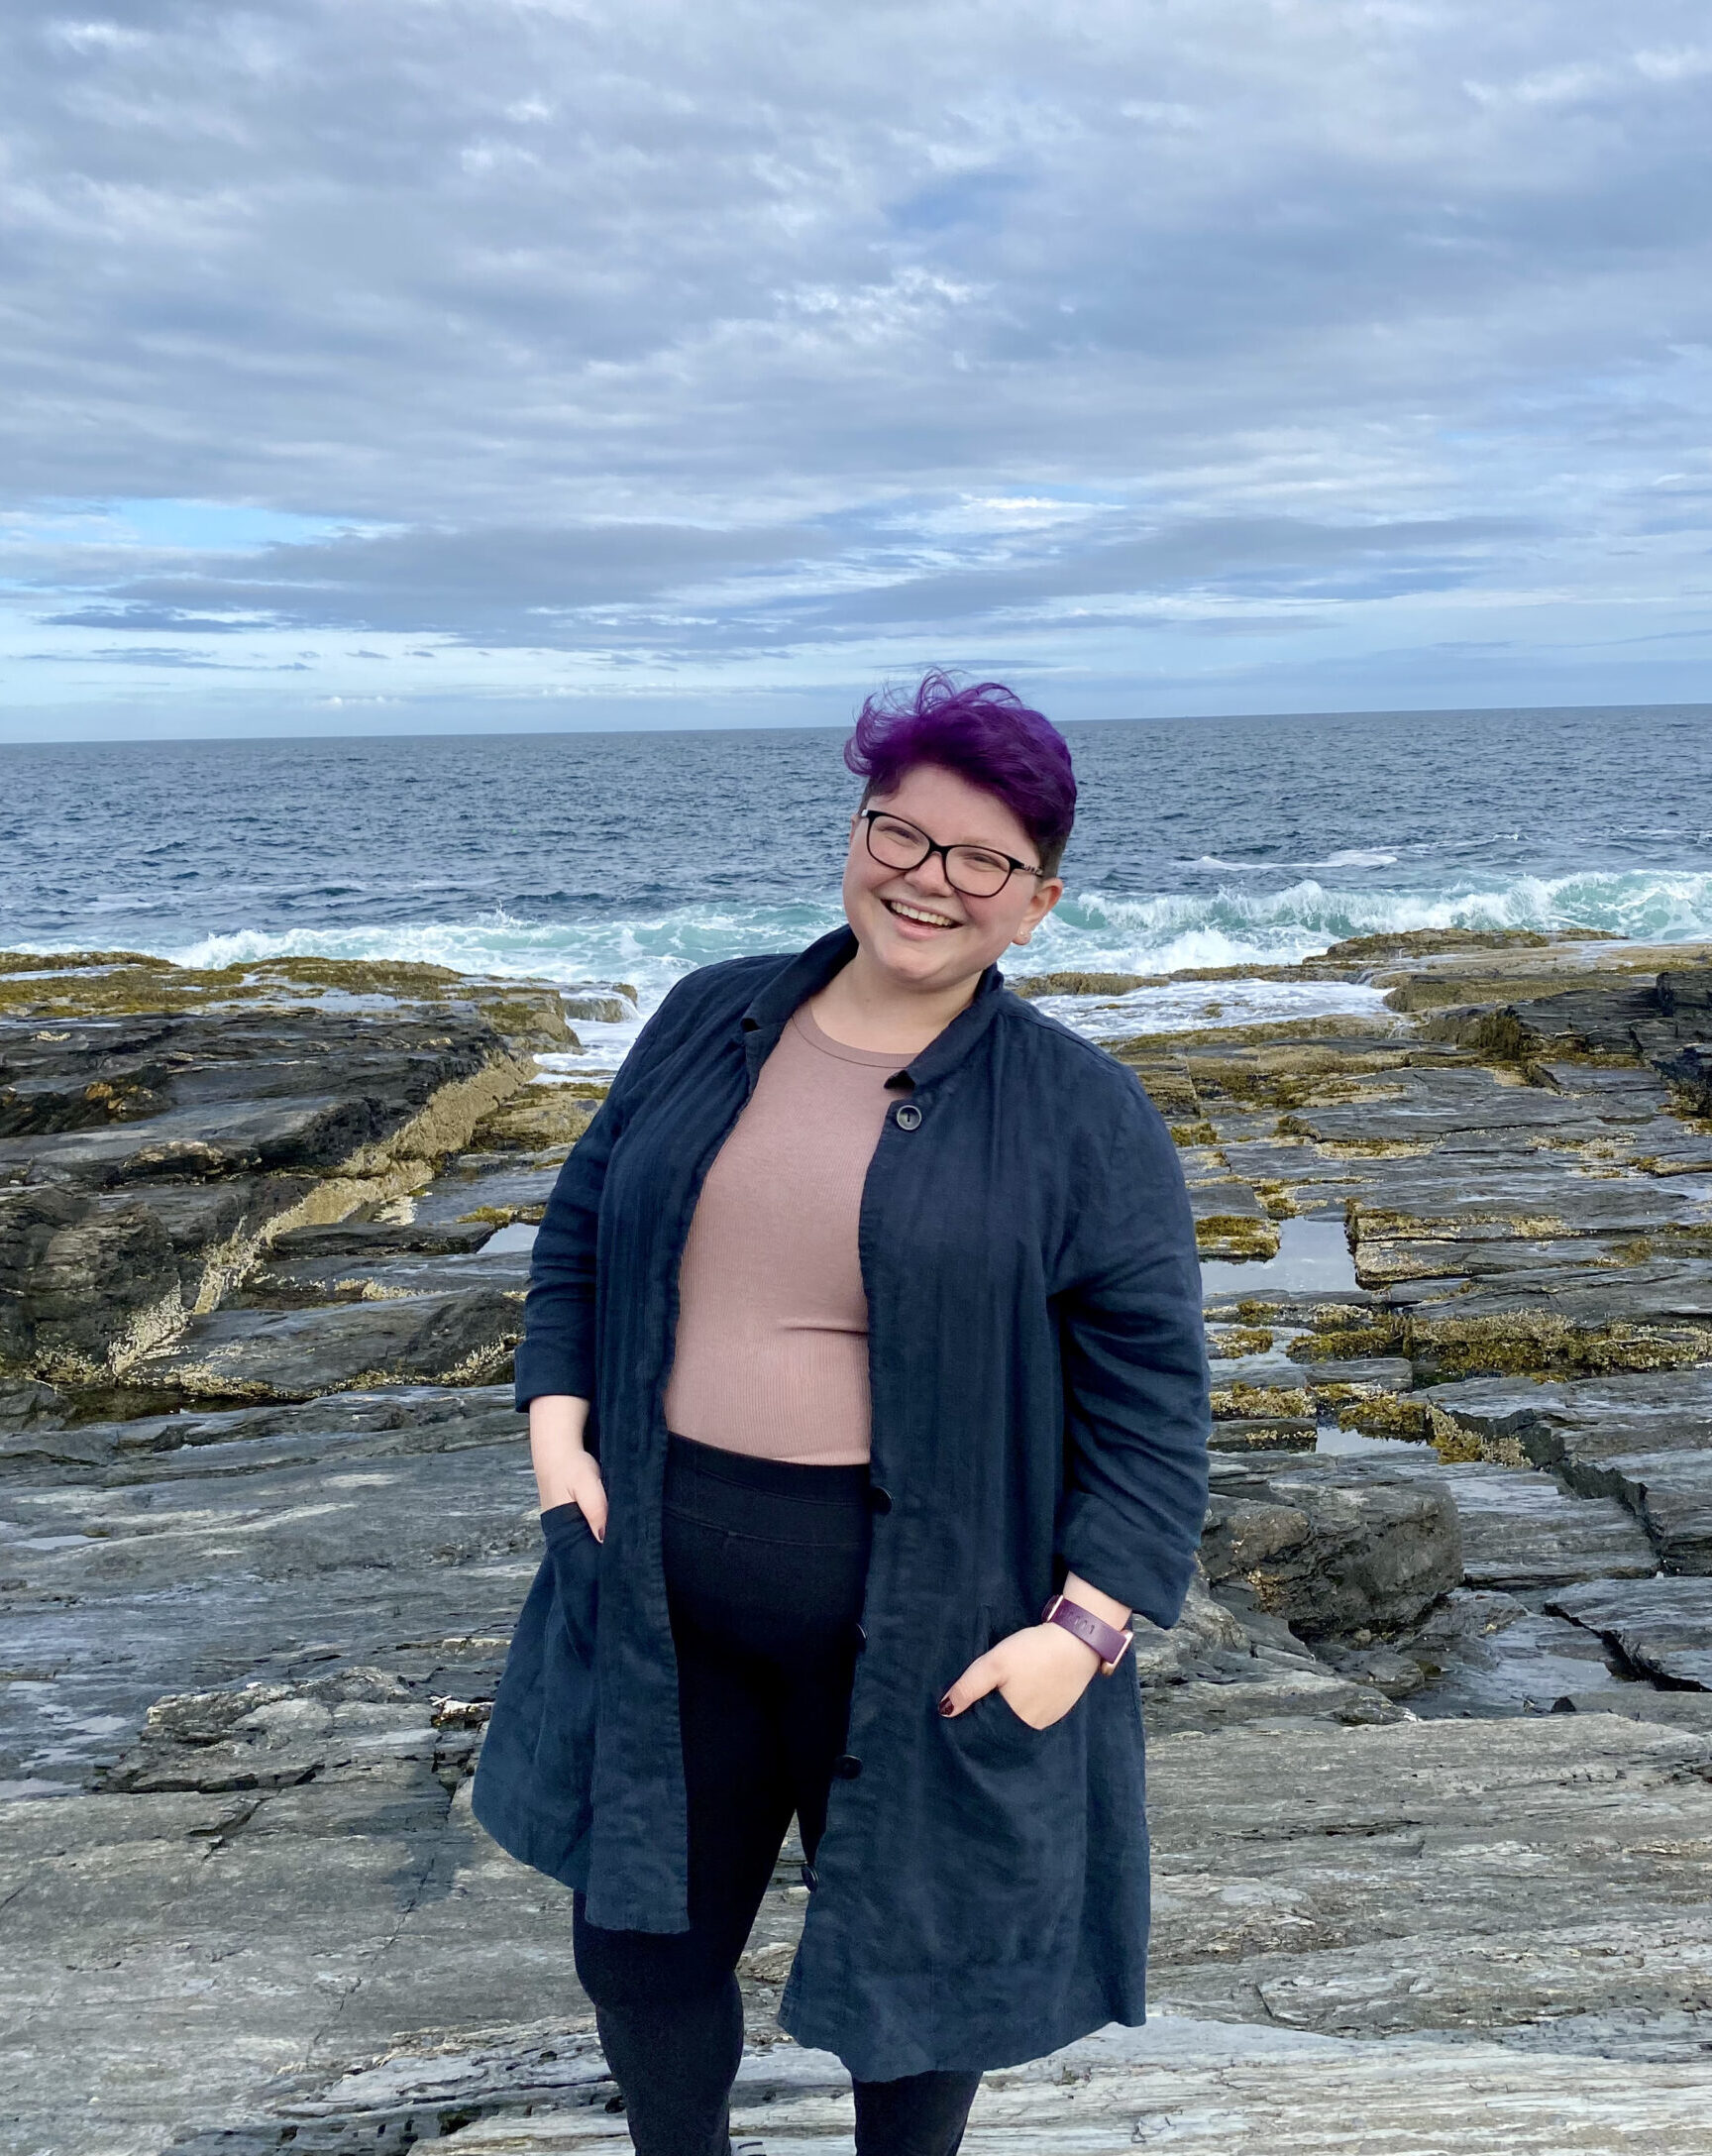 Sophia (the new TerraCorps member) at Cape Elizabeth, in a black cardigan sweater, purple shirt, and black pants. Her hair is also purple.